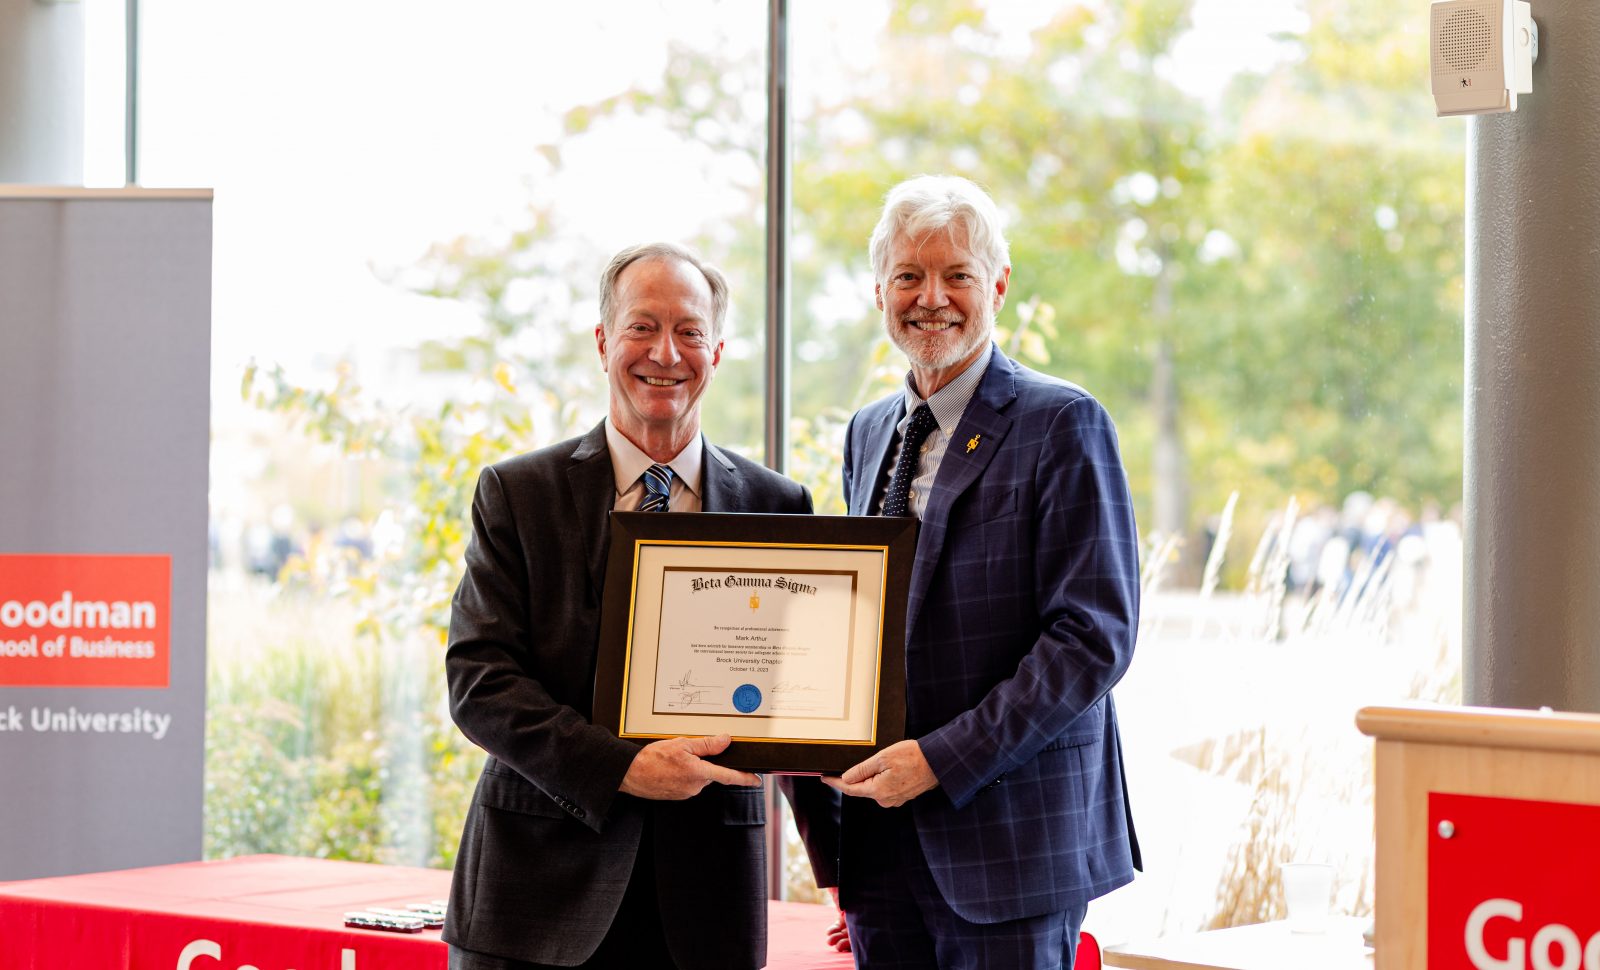 Beside a grey banner and red table cloth that reads Goodman School of Business two men in suits stand together holding a frame with a certificate inside.